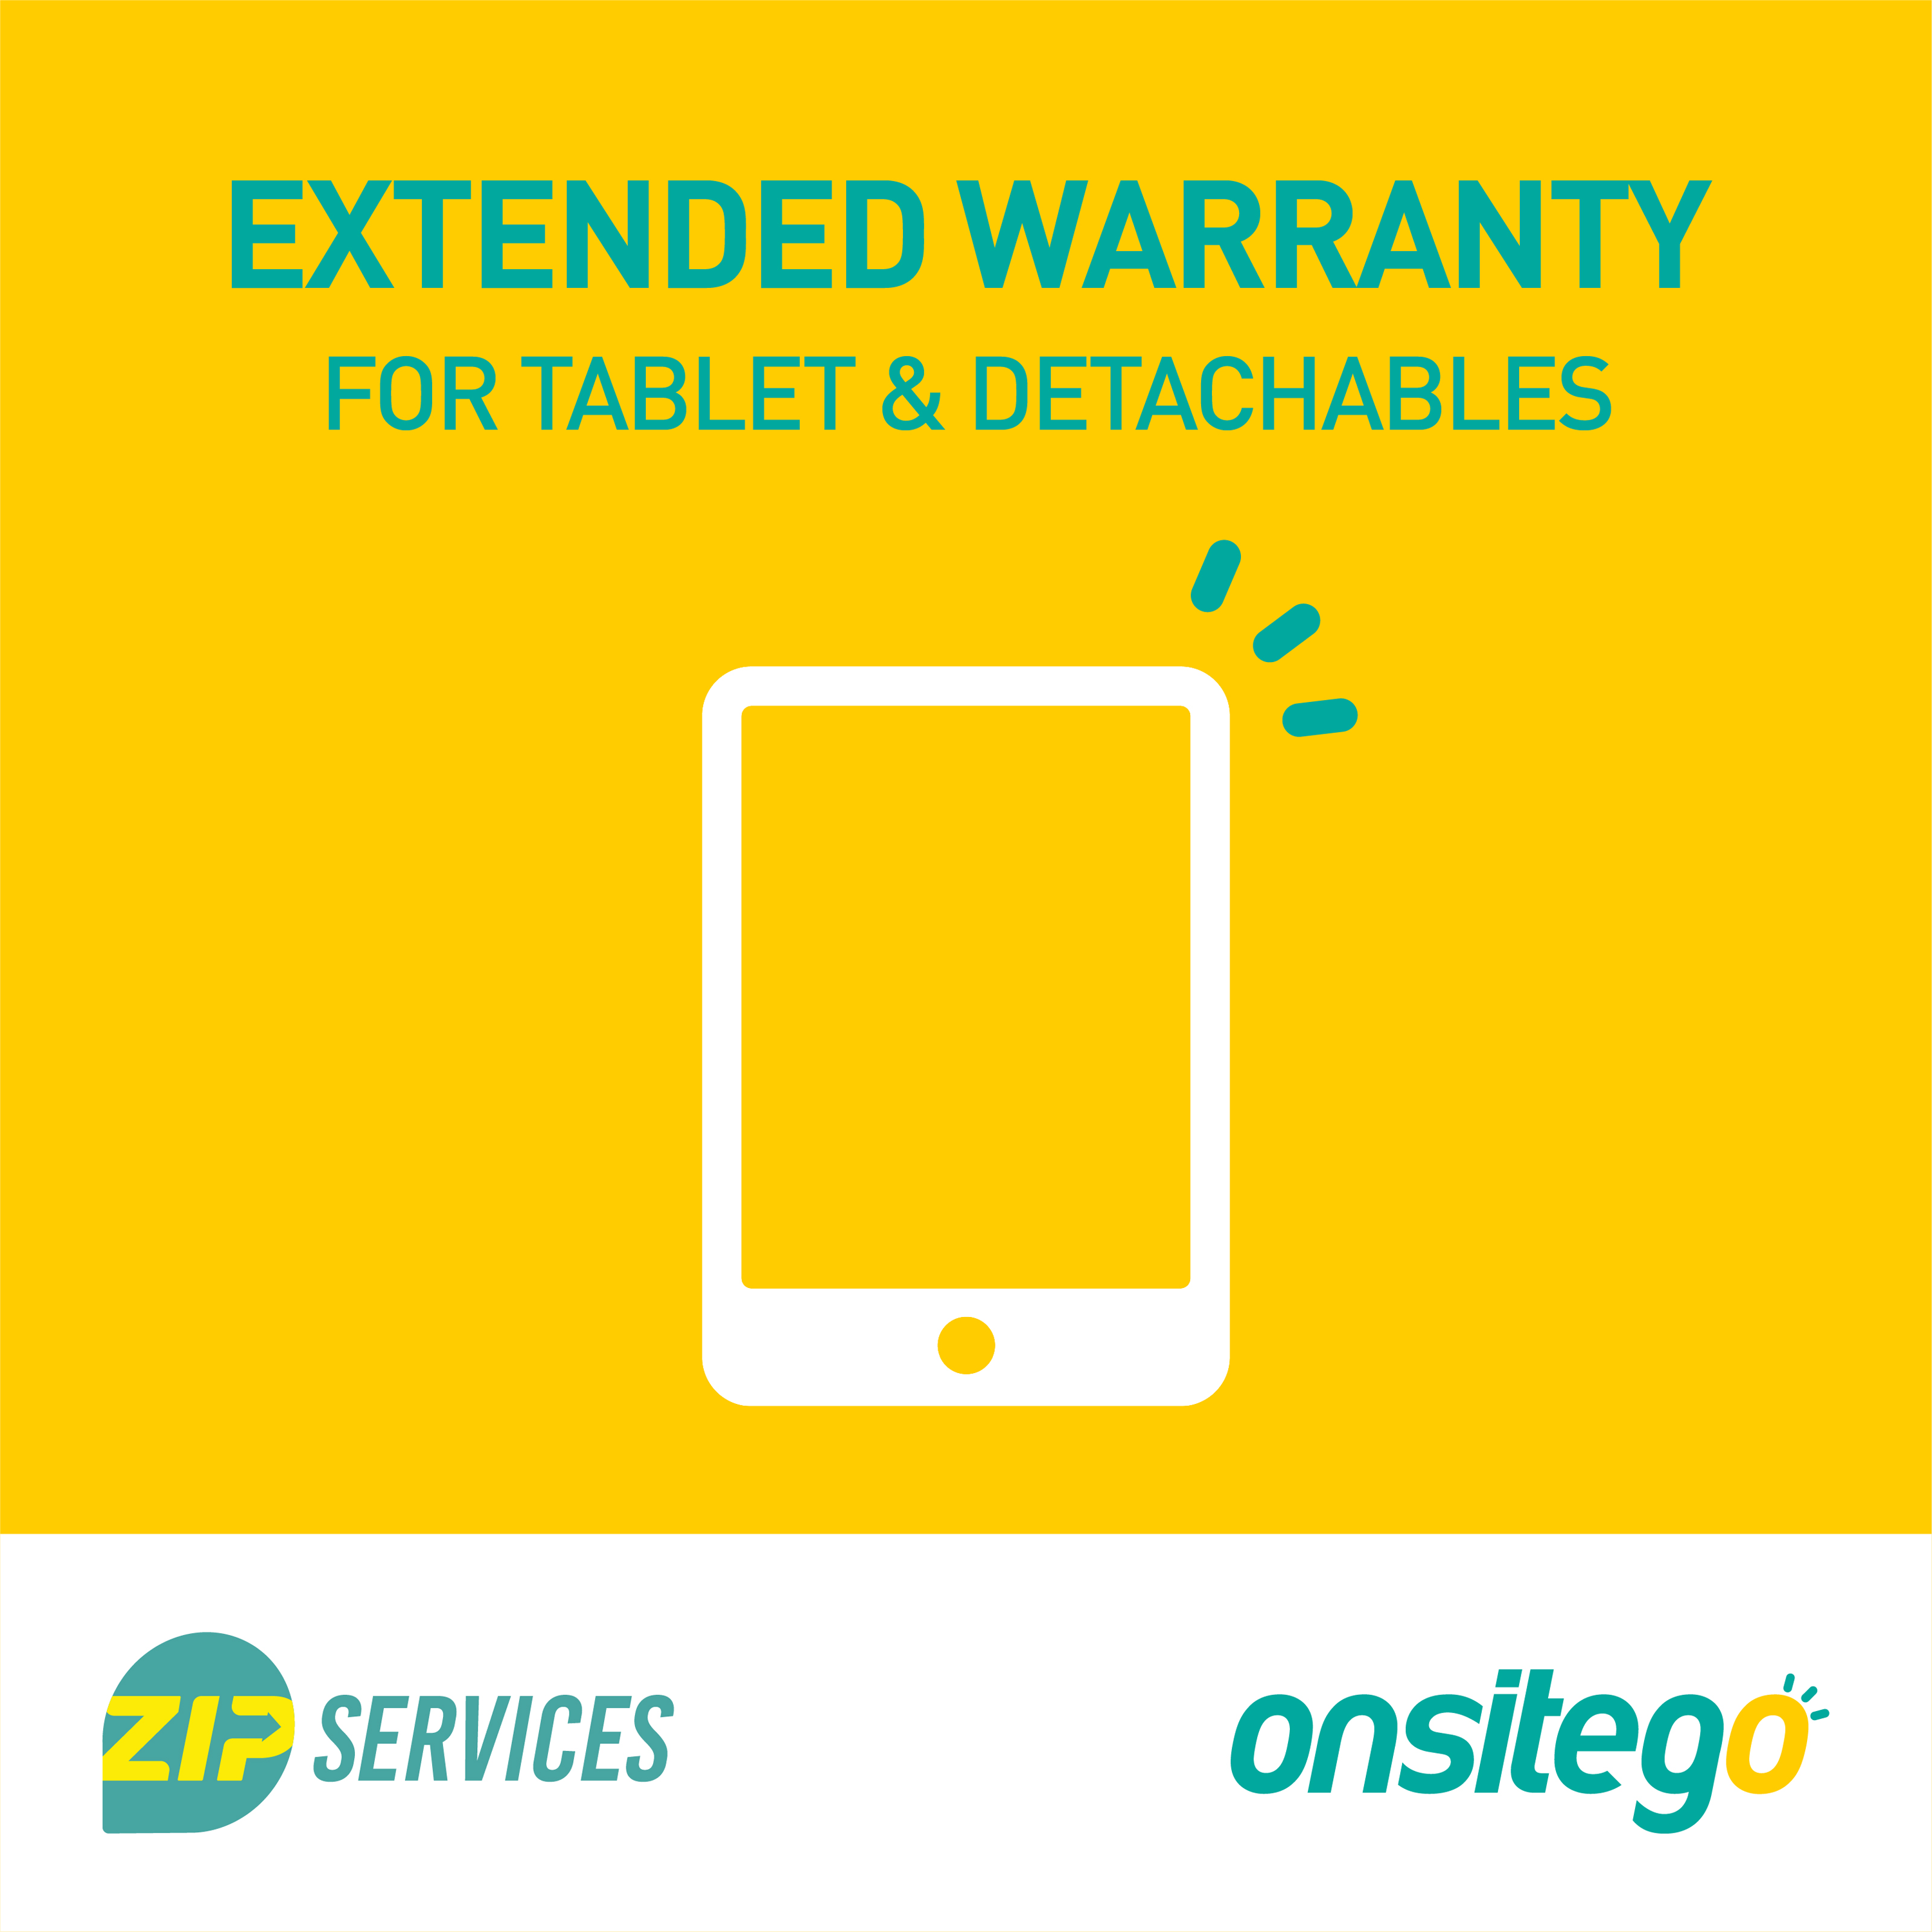 Onsitego 3 Months Extended Warranty for Tablets Rs.170001 - Rs.180000_1